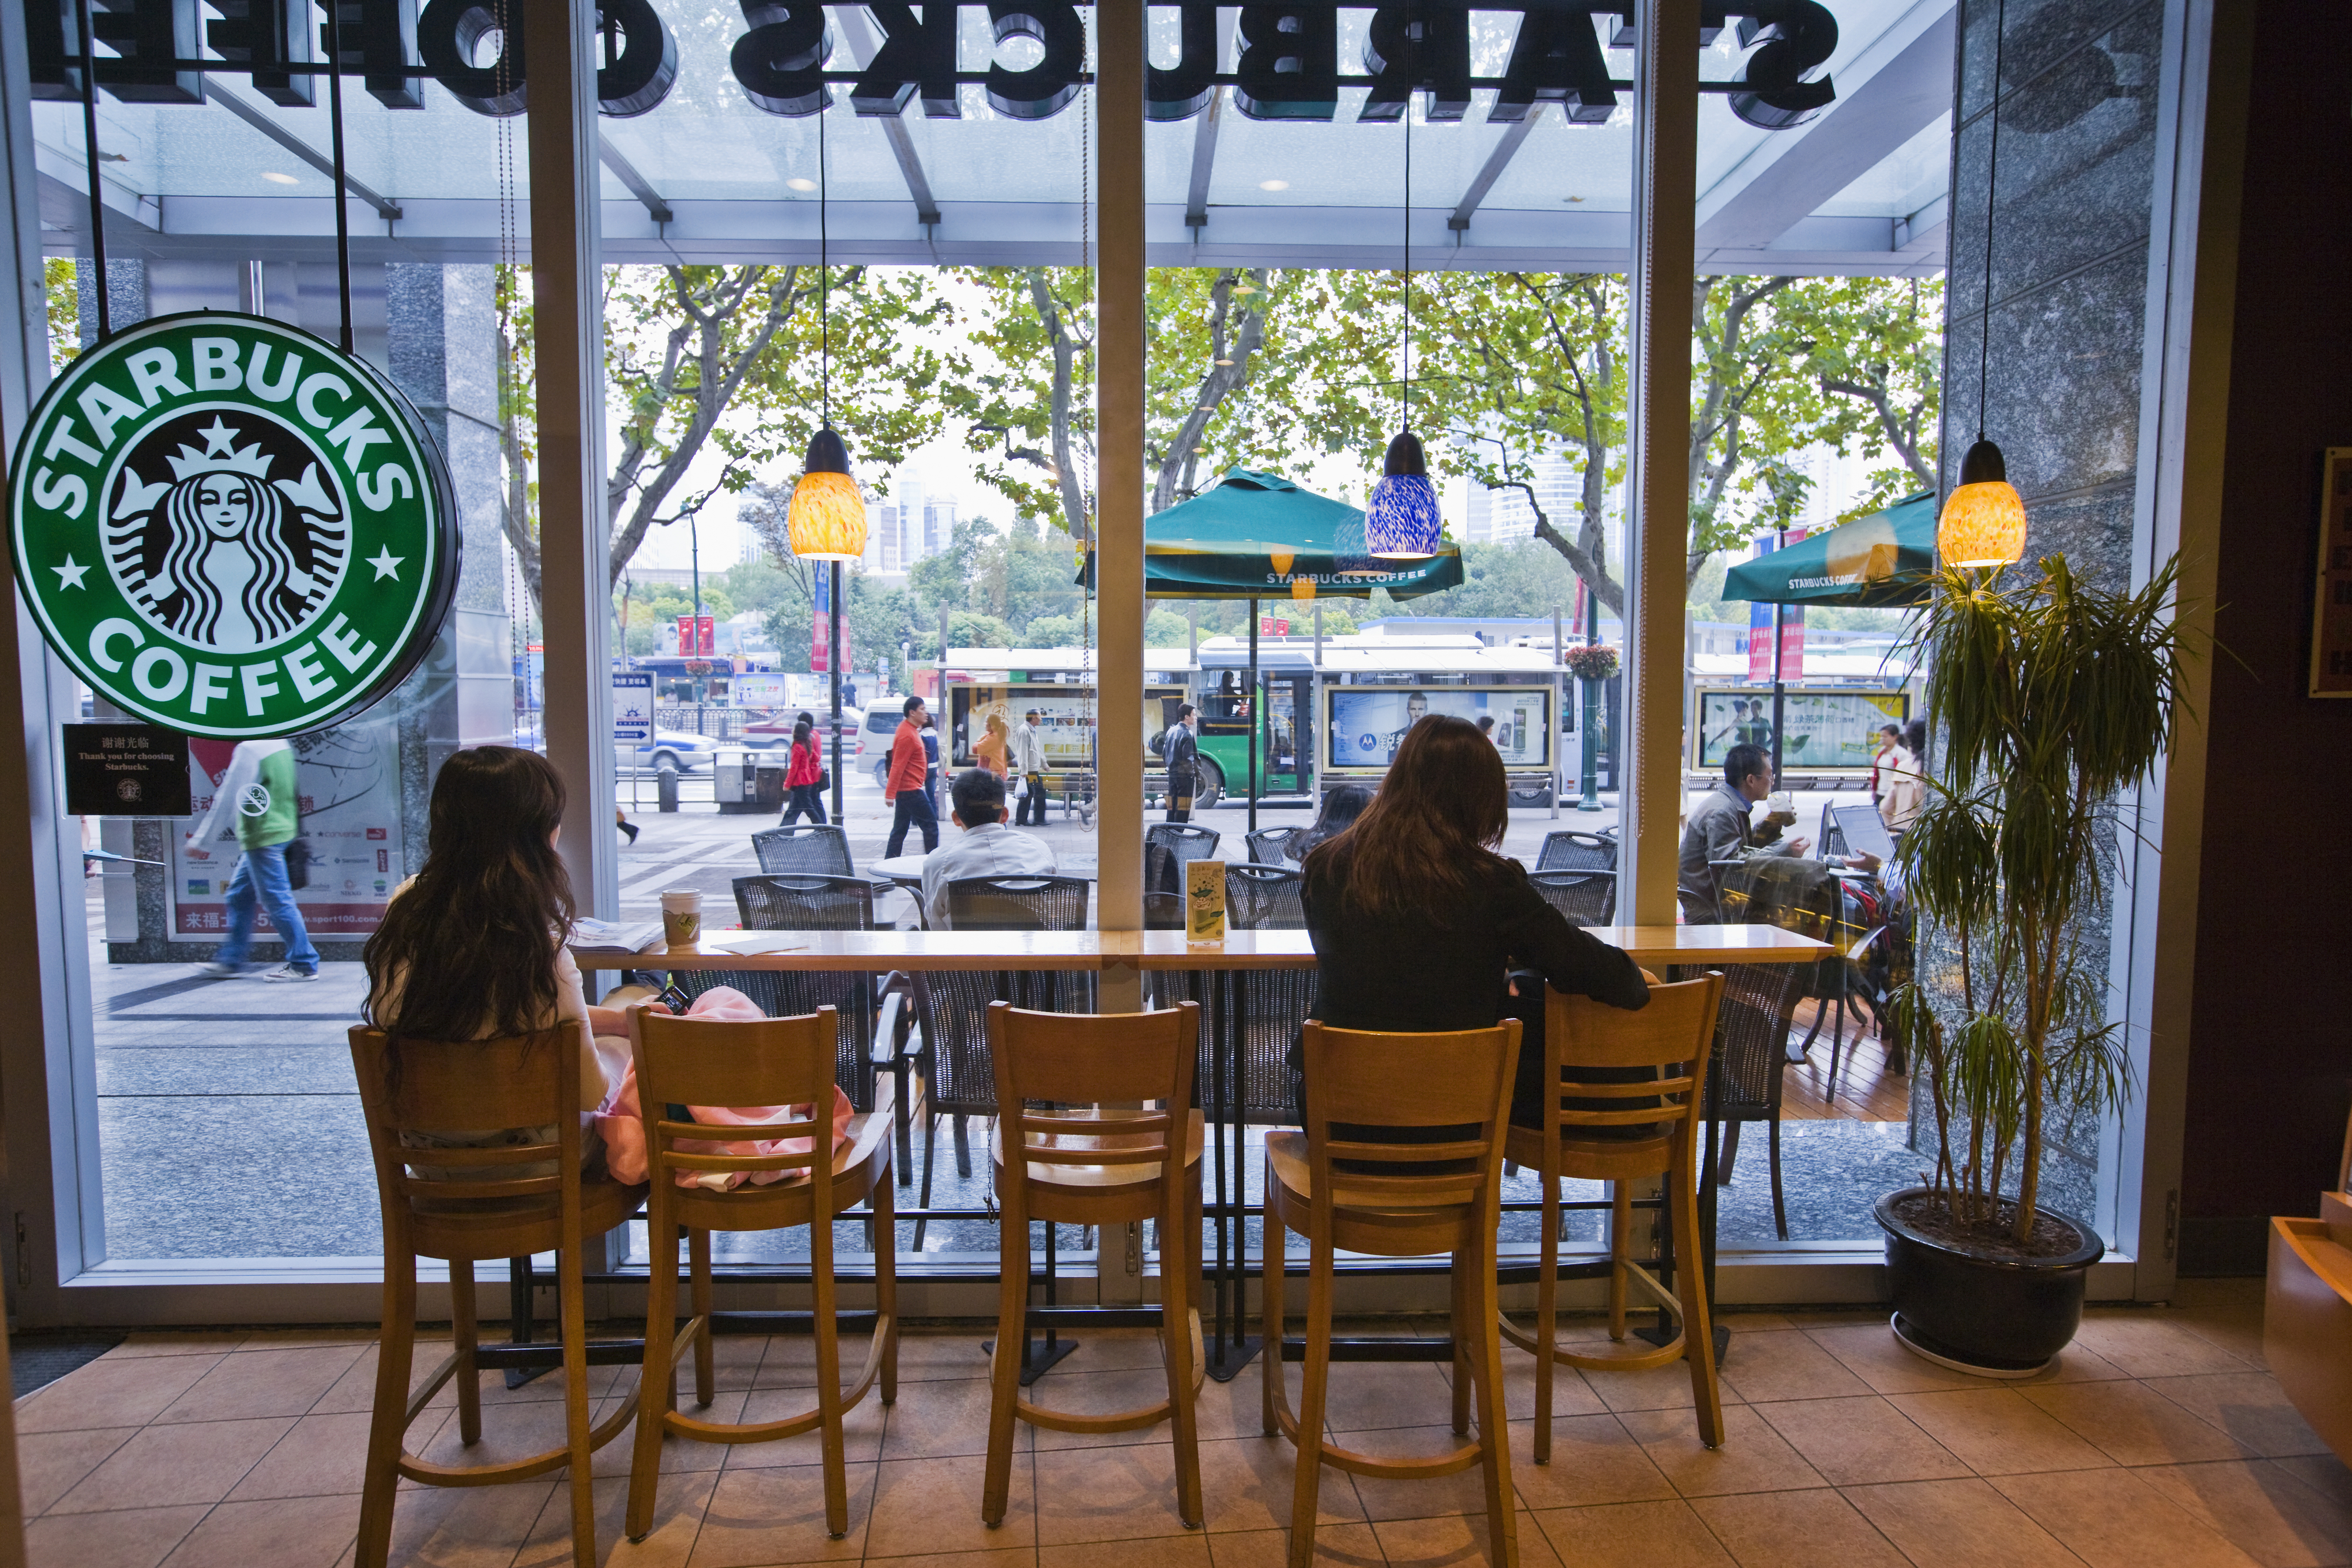 People sitting in a Starbucks café